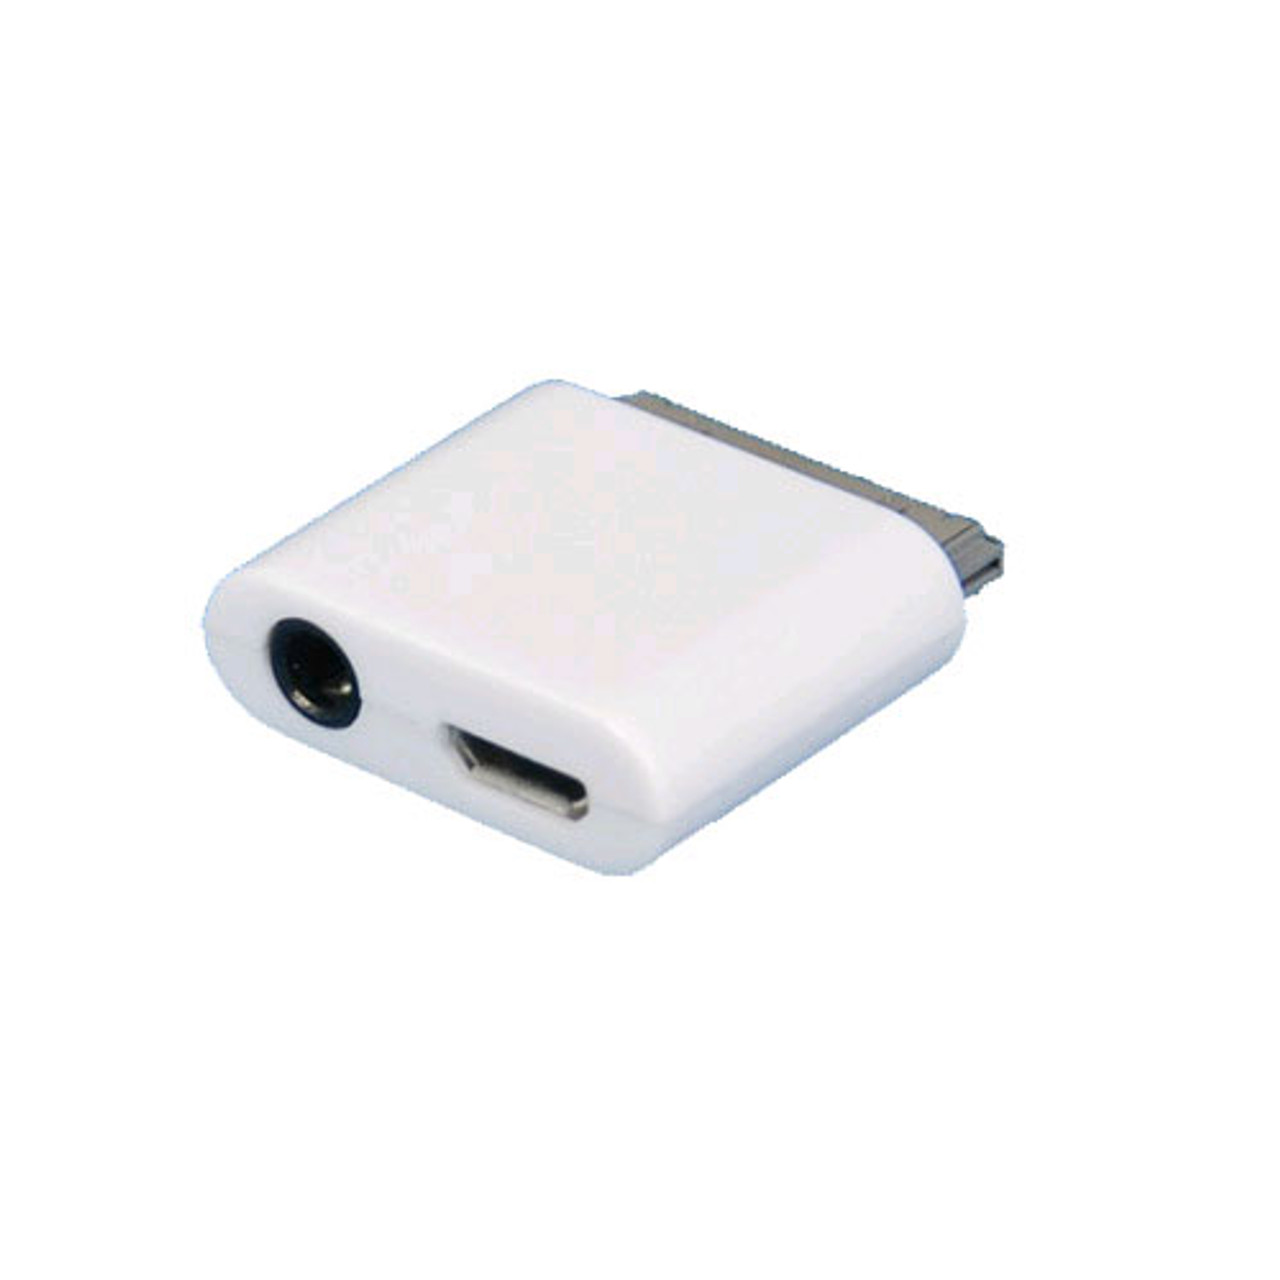 Generic CABLE iPhone 4 & 4S / iPhone 3GS / 3G / iPad 3 / iPad 2